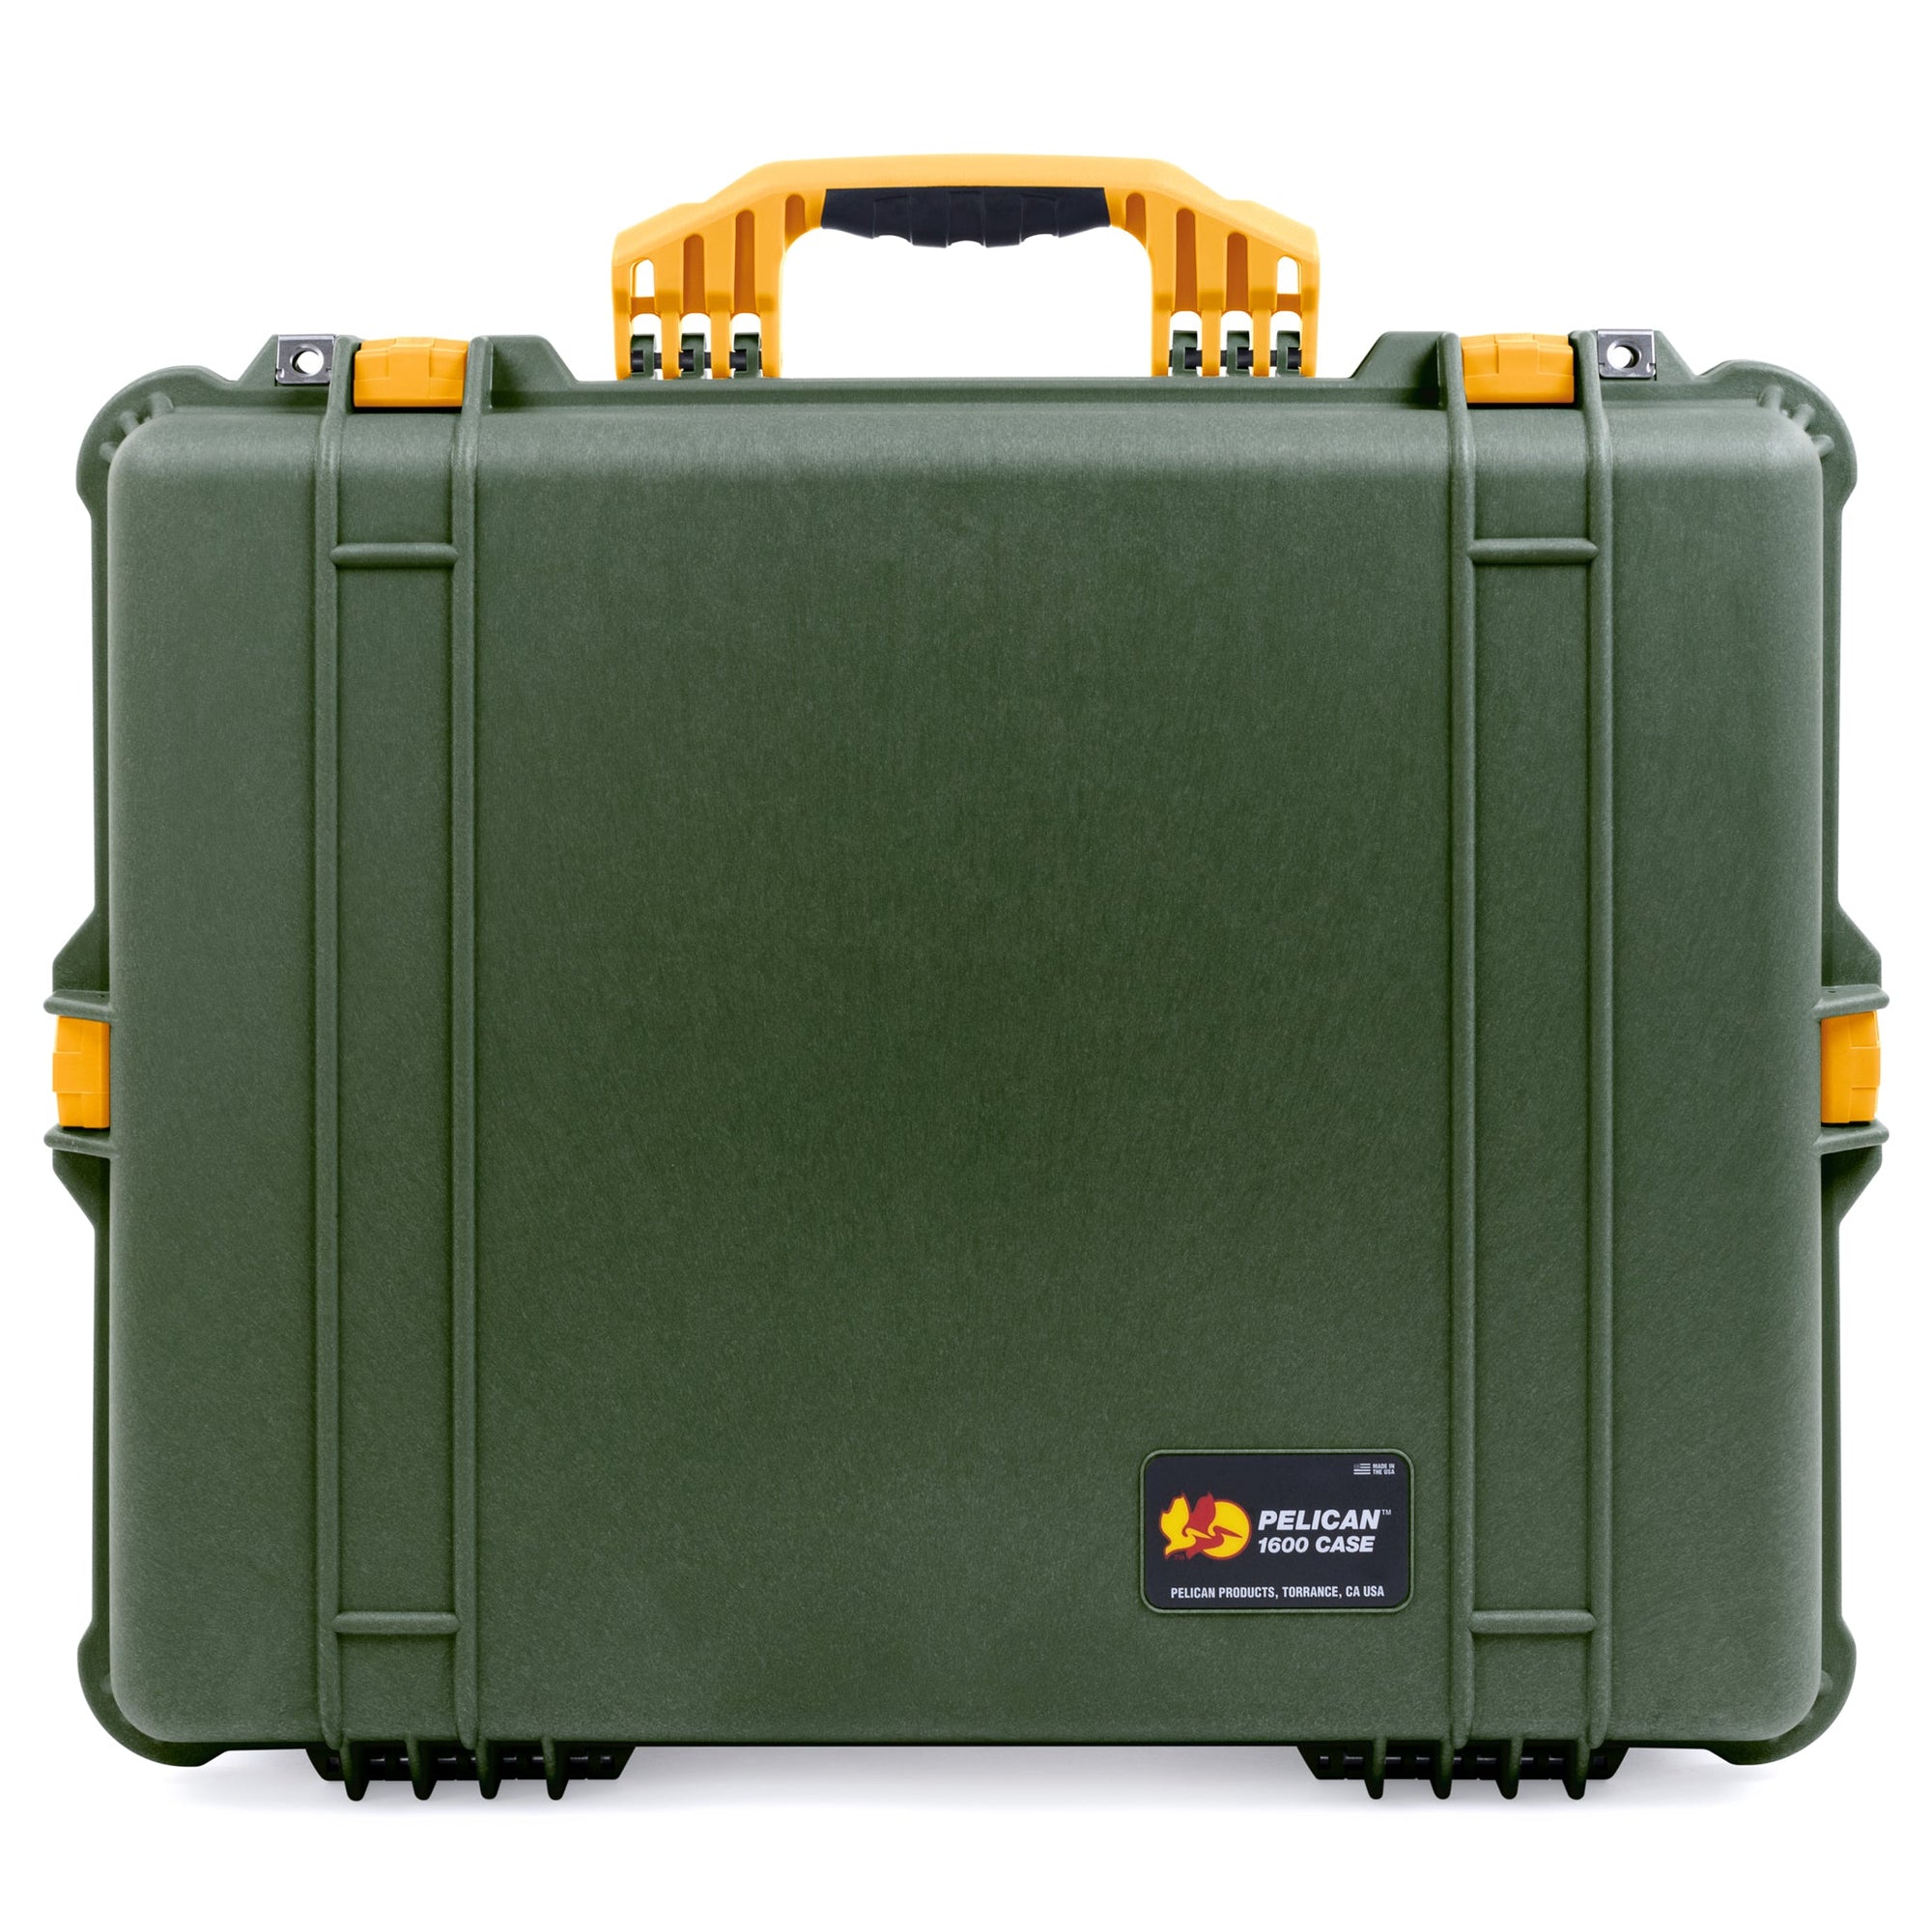 Pelican 1600 Case, OD Green with Yellow Handle & Latches ColorCase 